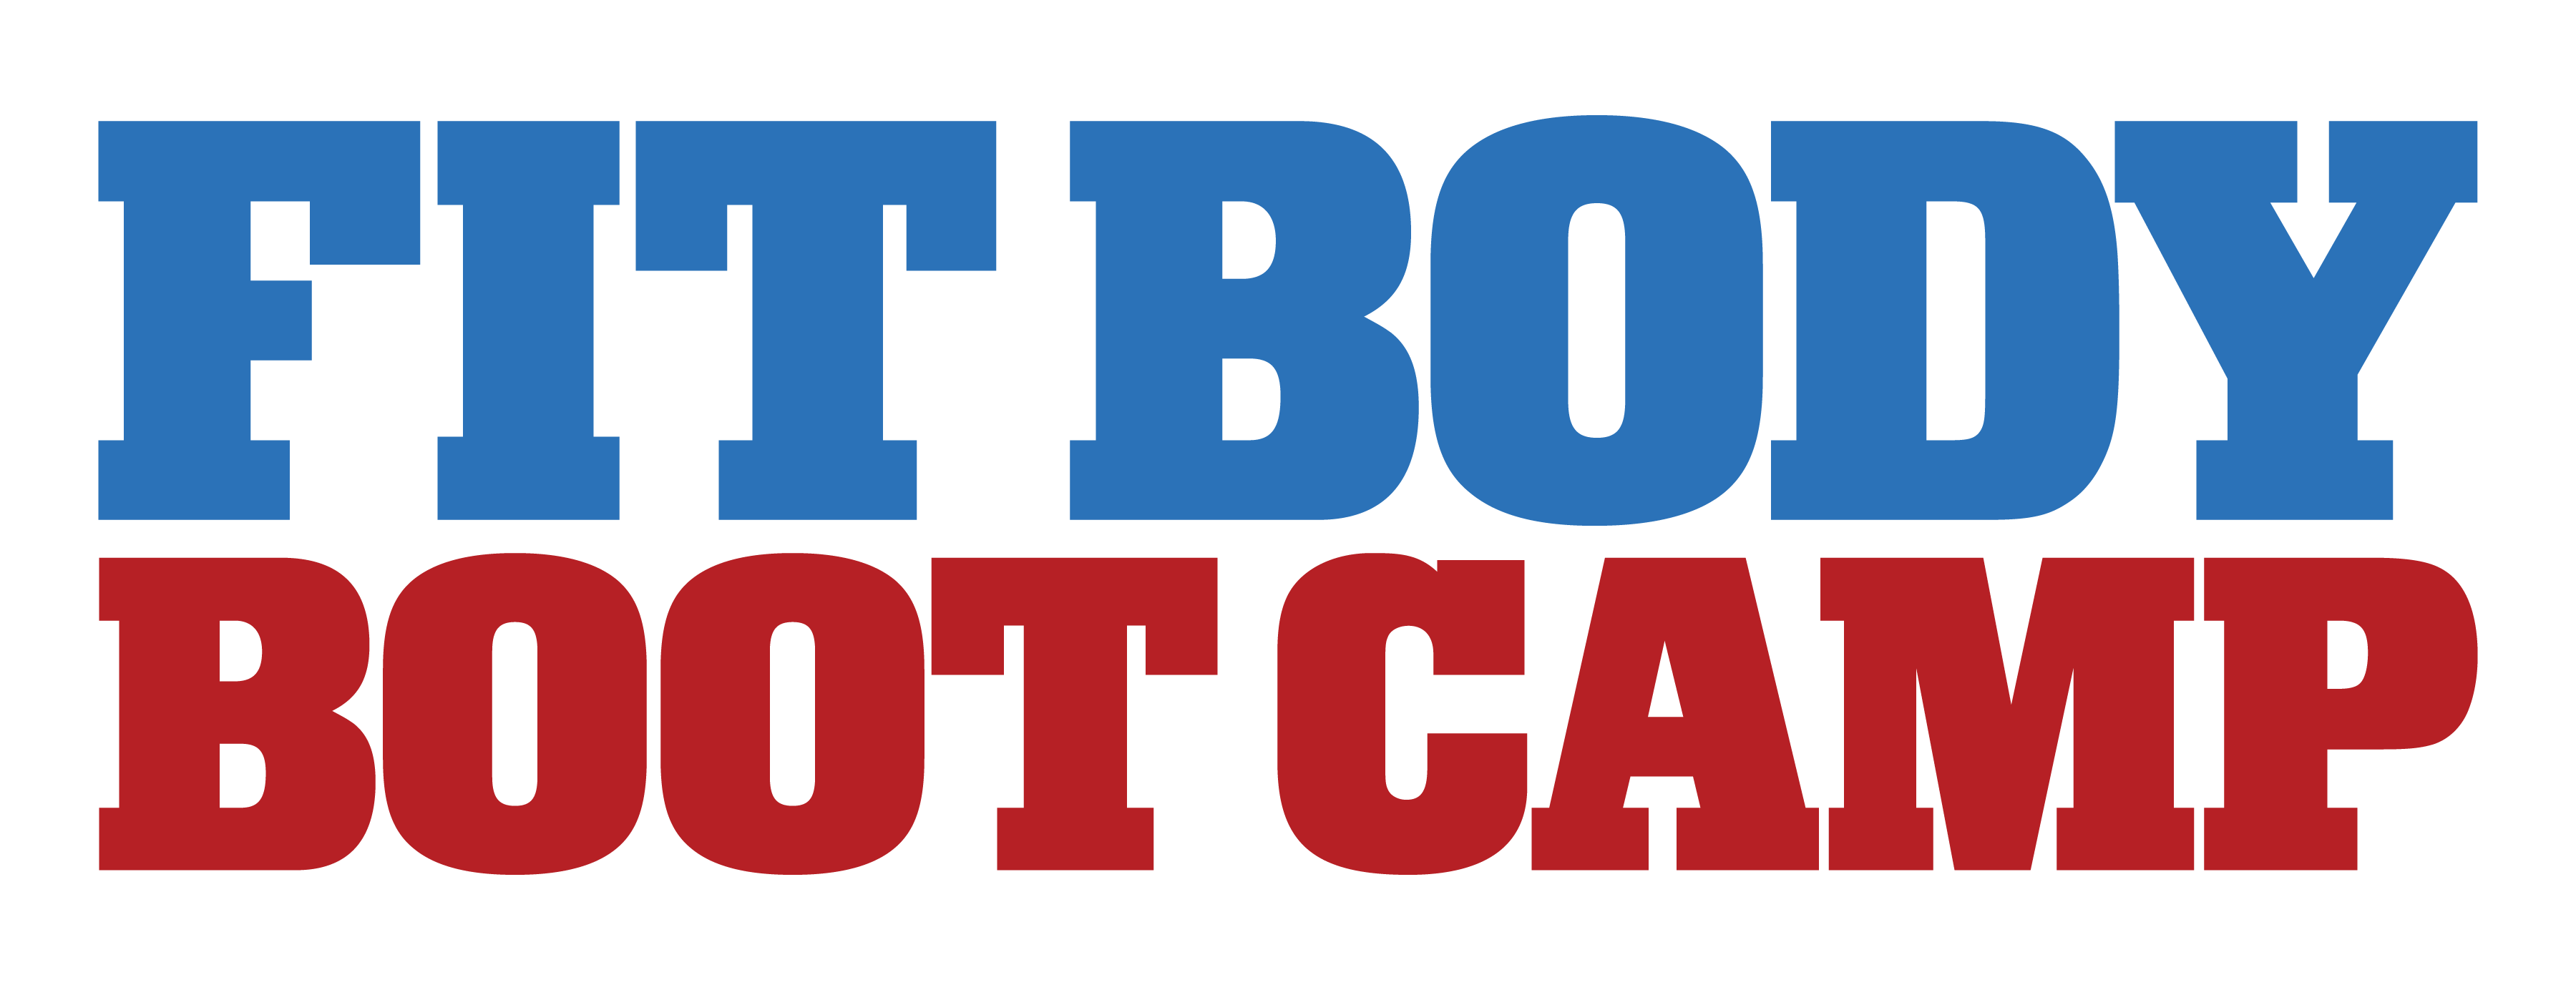 Boot Camp Logo - File:Fit Body Boot Camp Logo.png - Wikimedia Commons